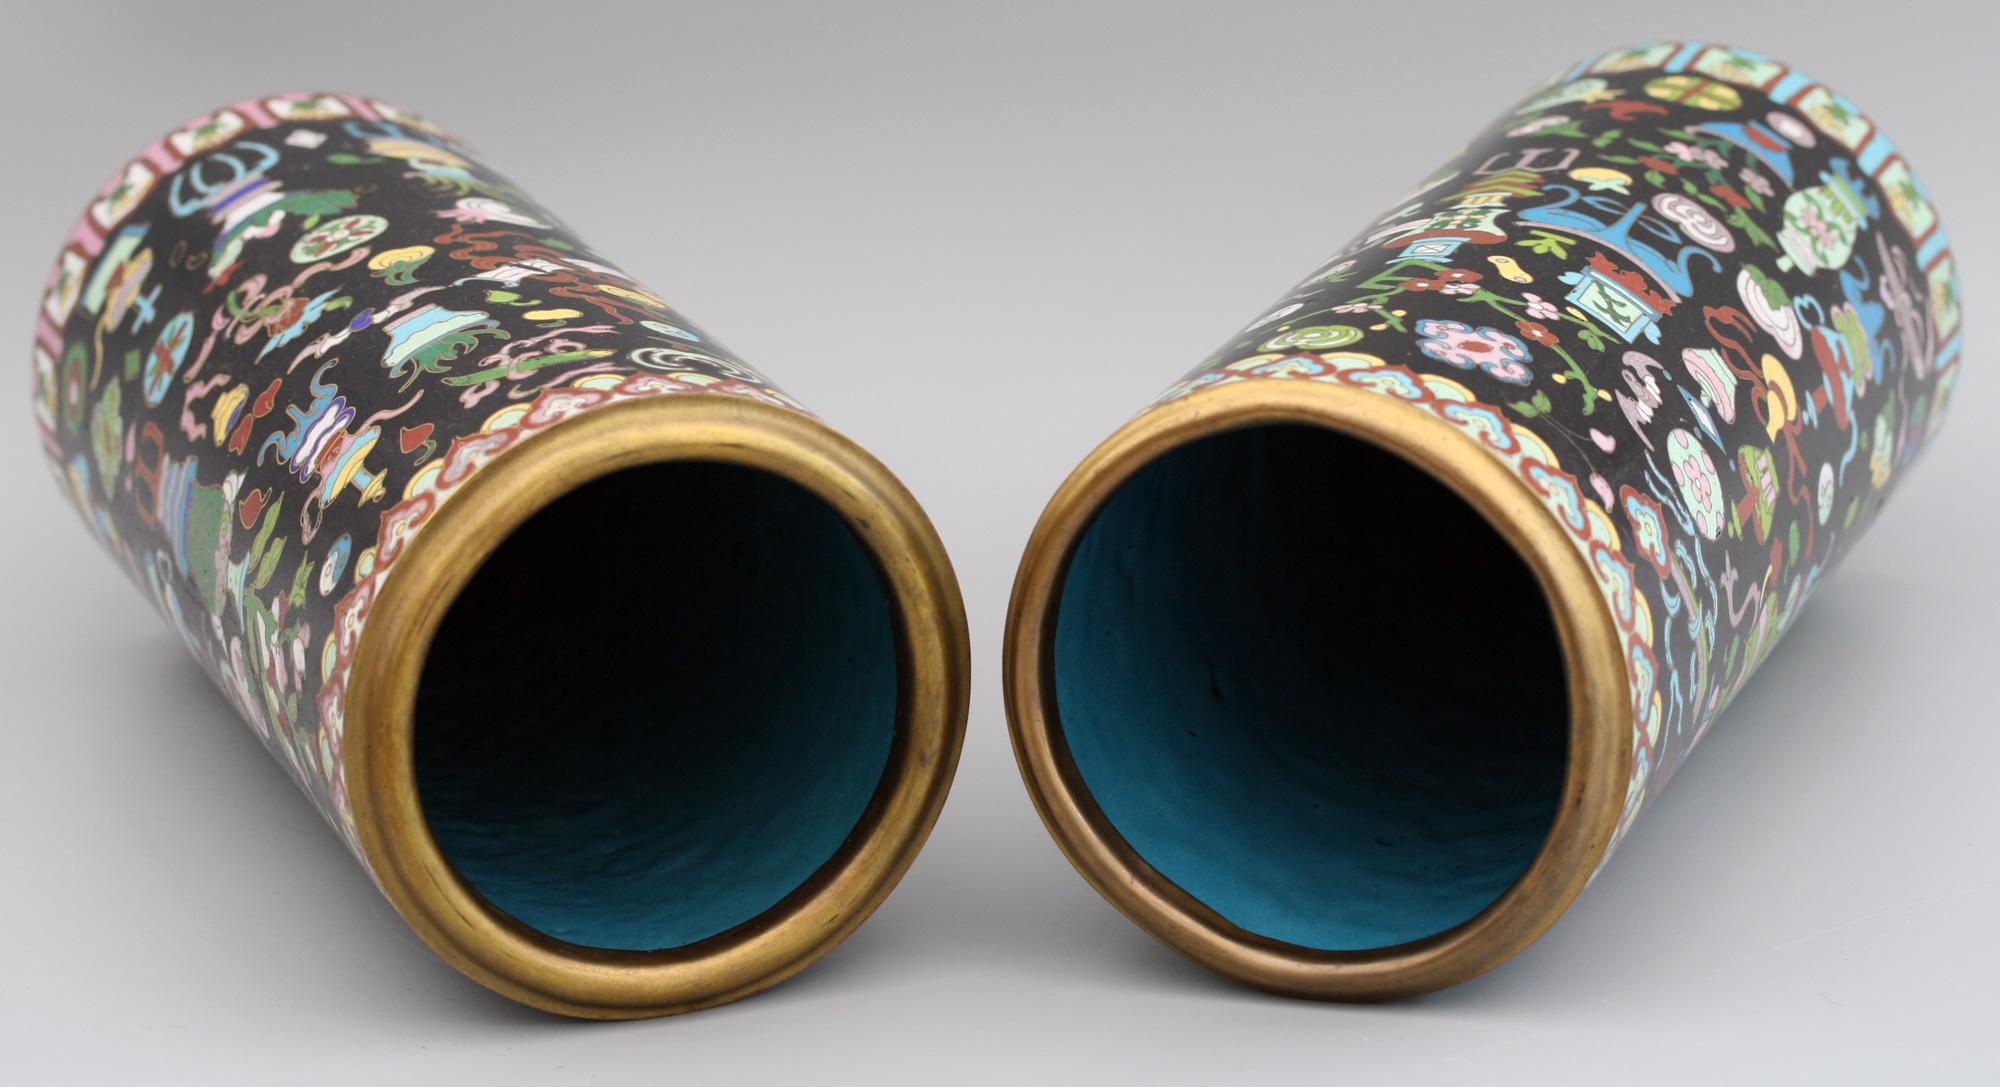 Pair of Chinese Cloisonné Cylindrical Precious Object Vases For Sale 7